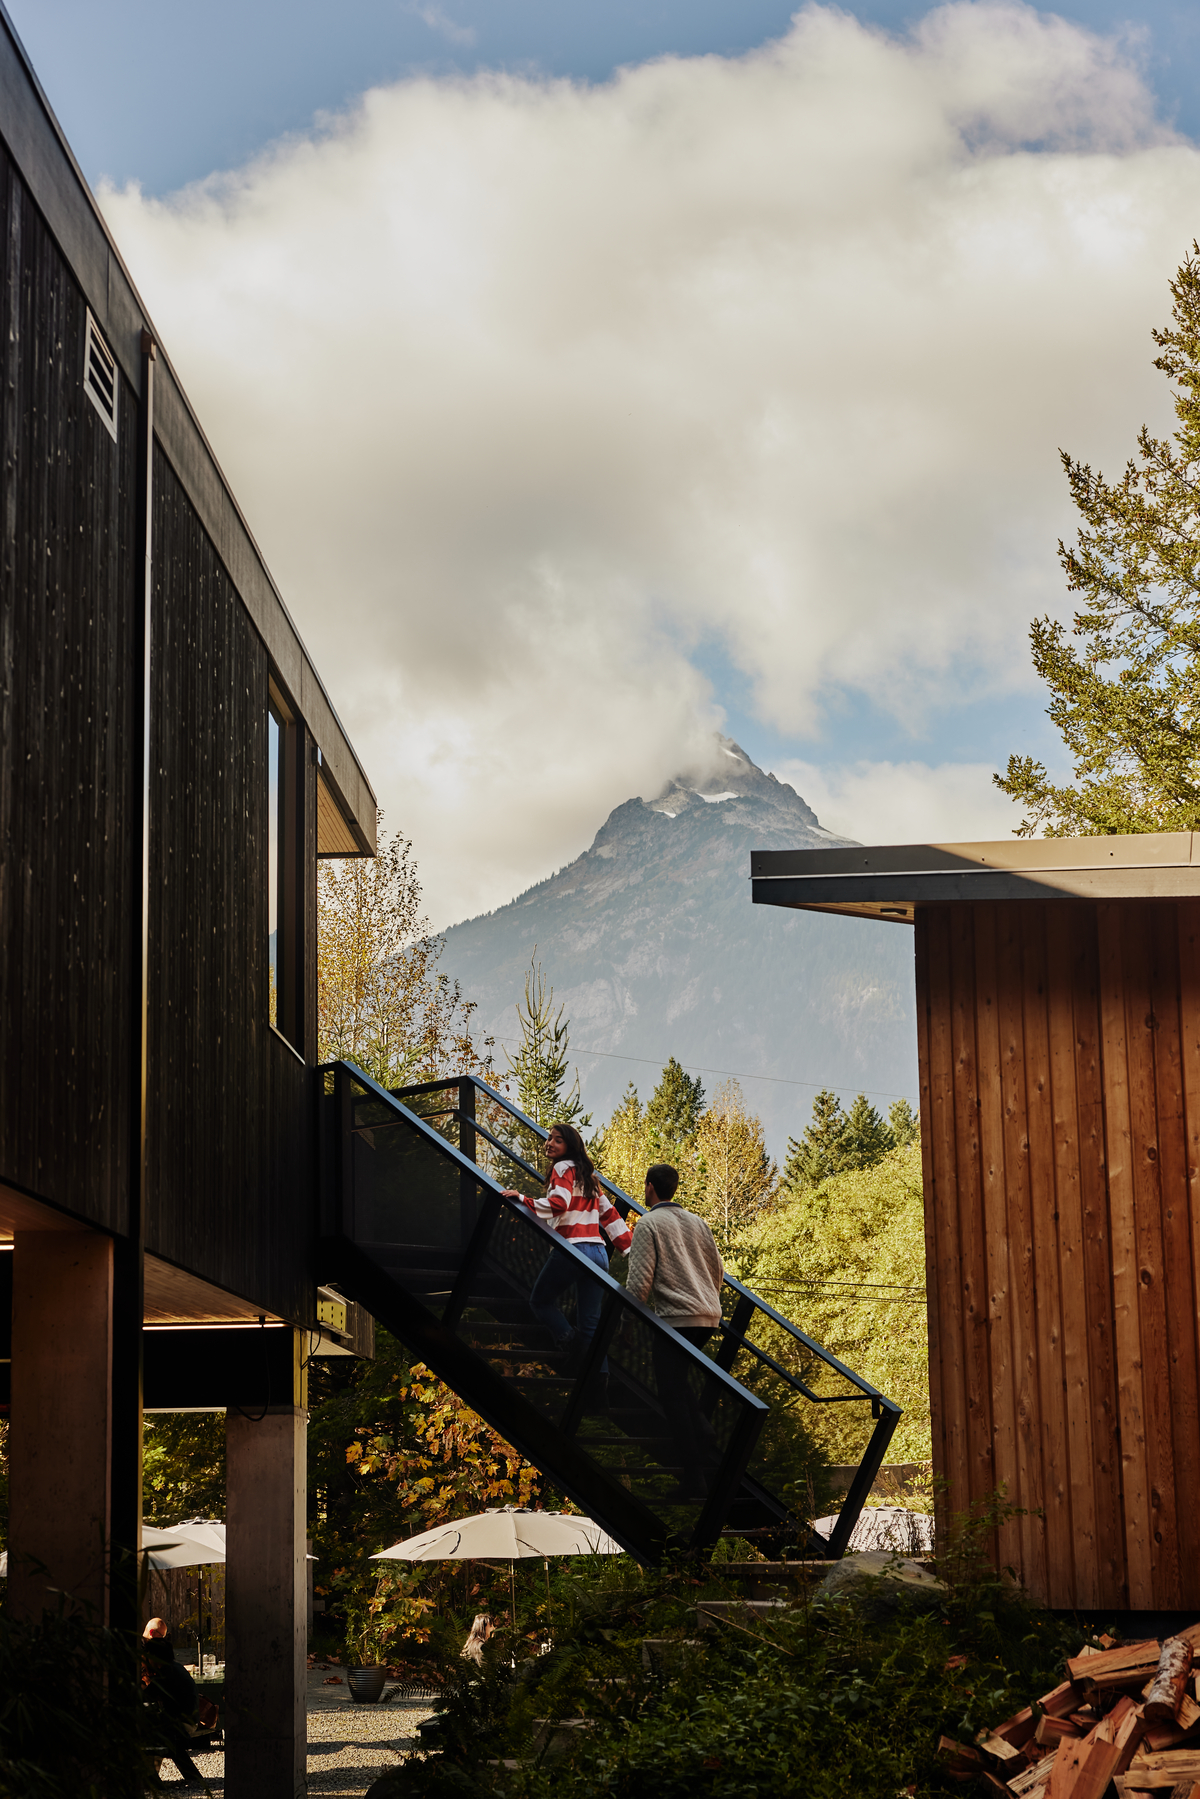 A couple is walking up the metal stairs at Fergie's Cafe in Squamish and taking in the mountain backdrop.